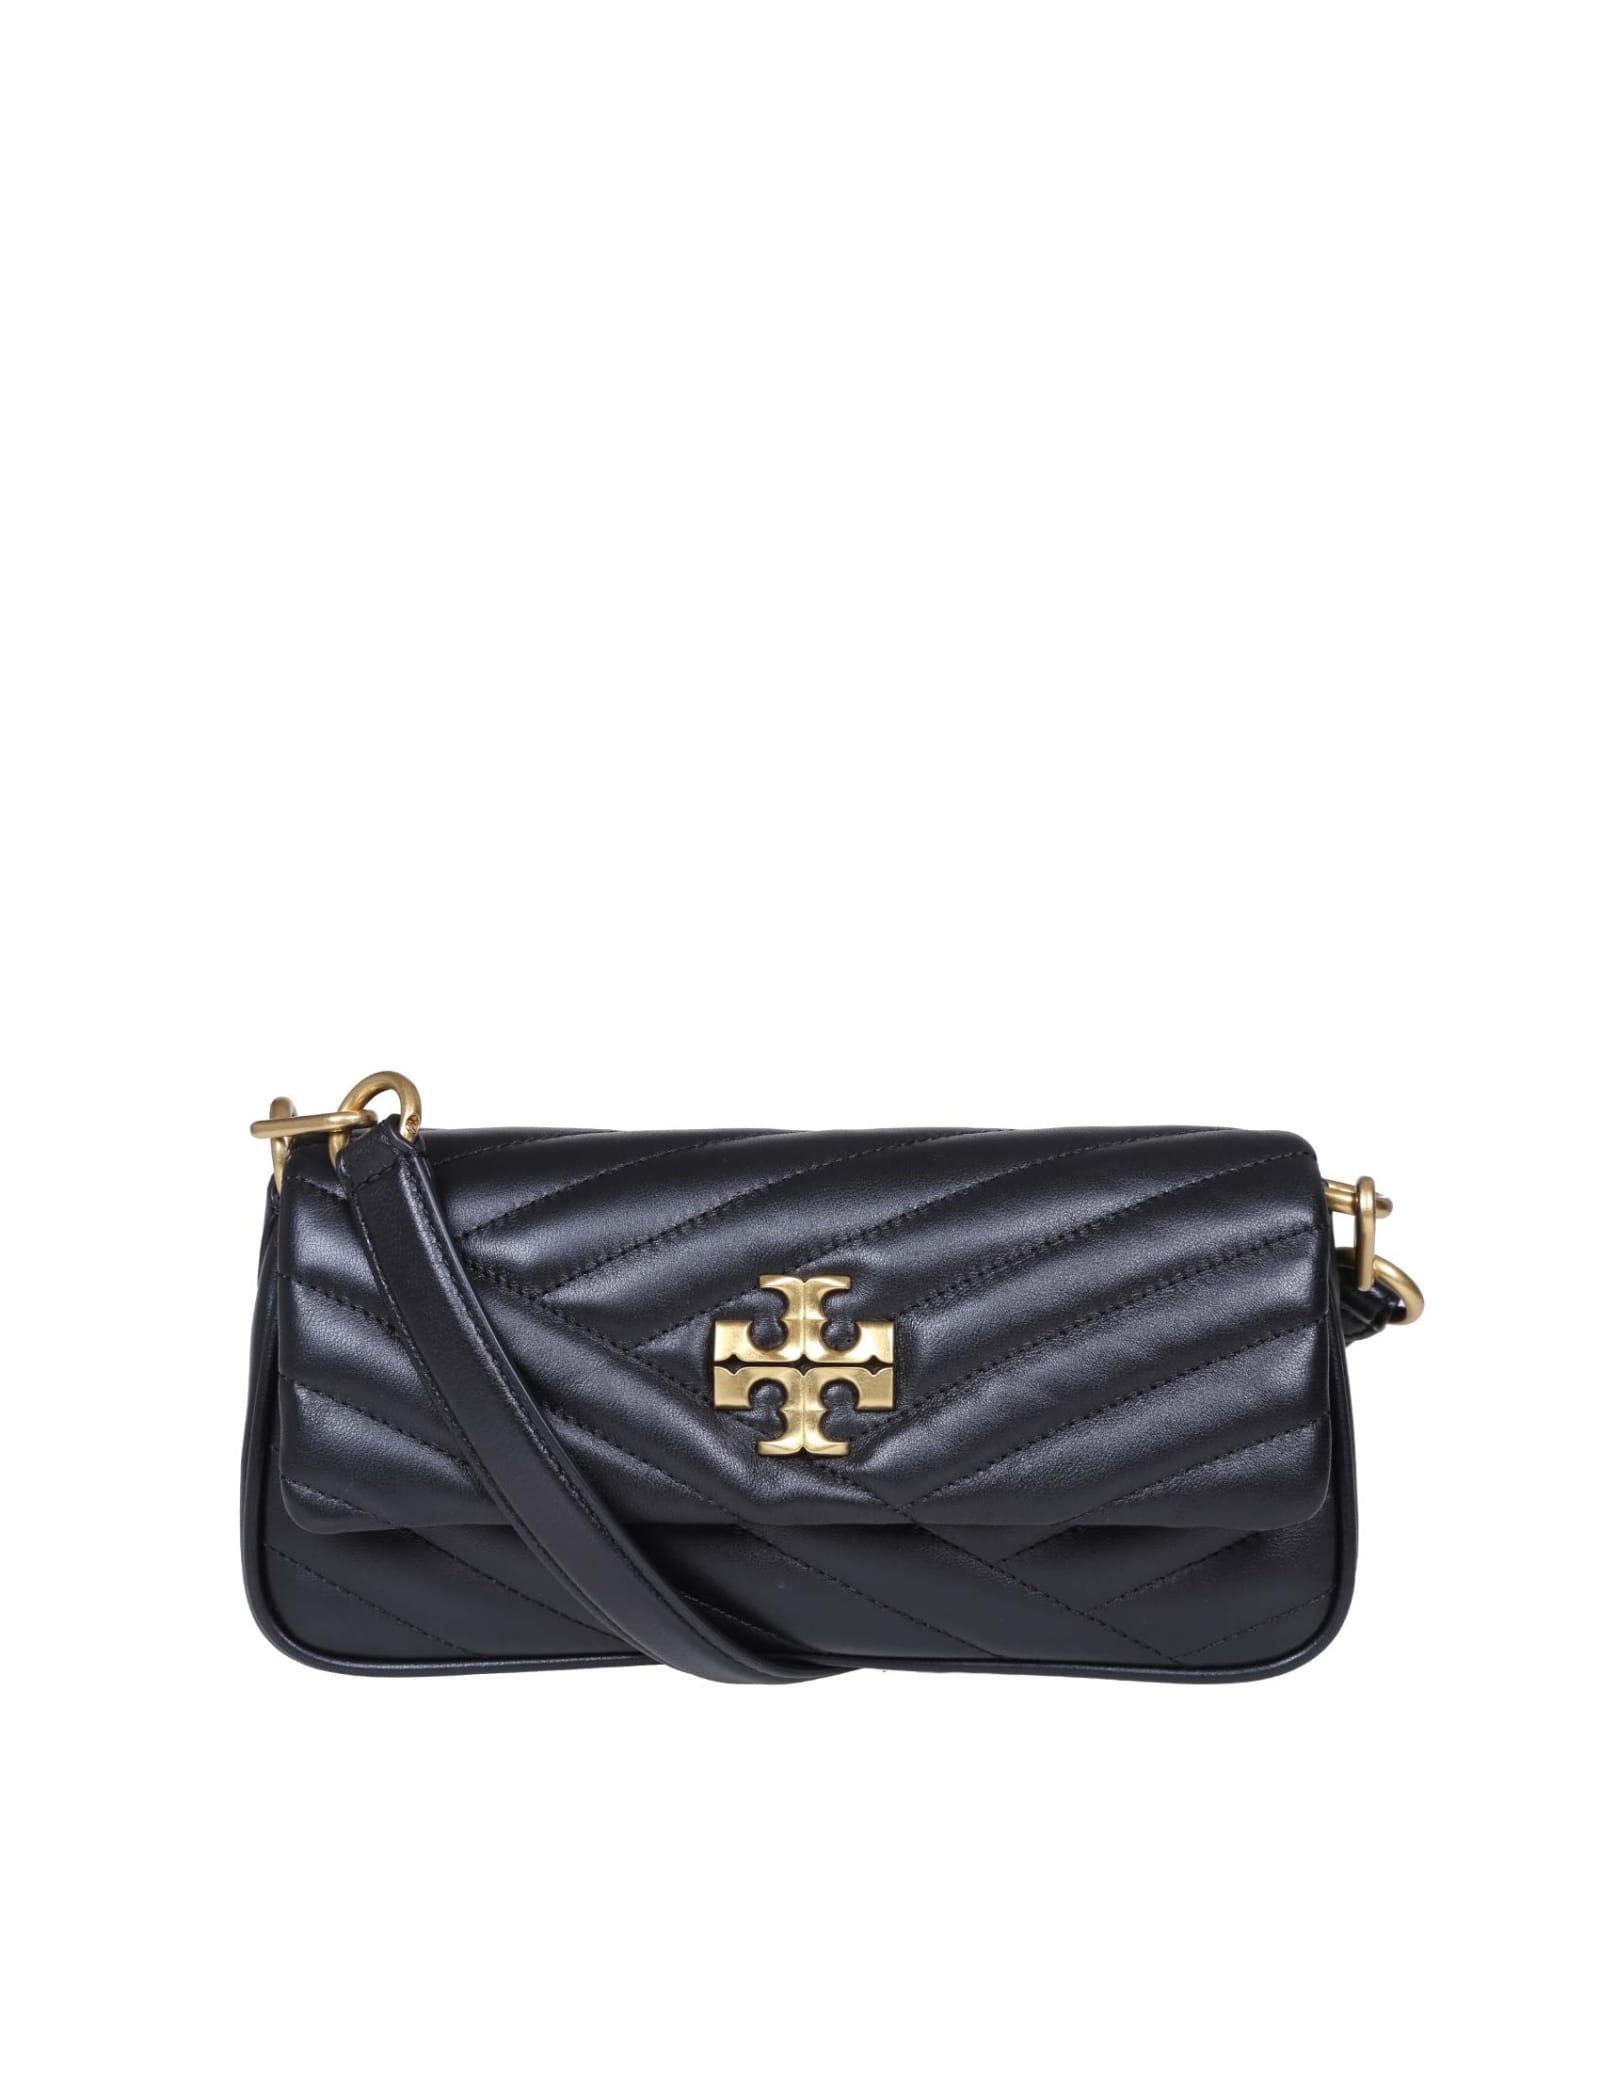 Tory Burch Kira Small Chevron In Leather With Flap